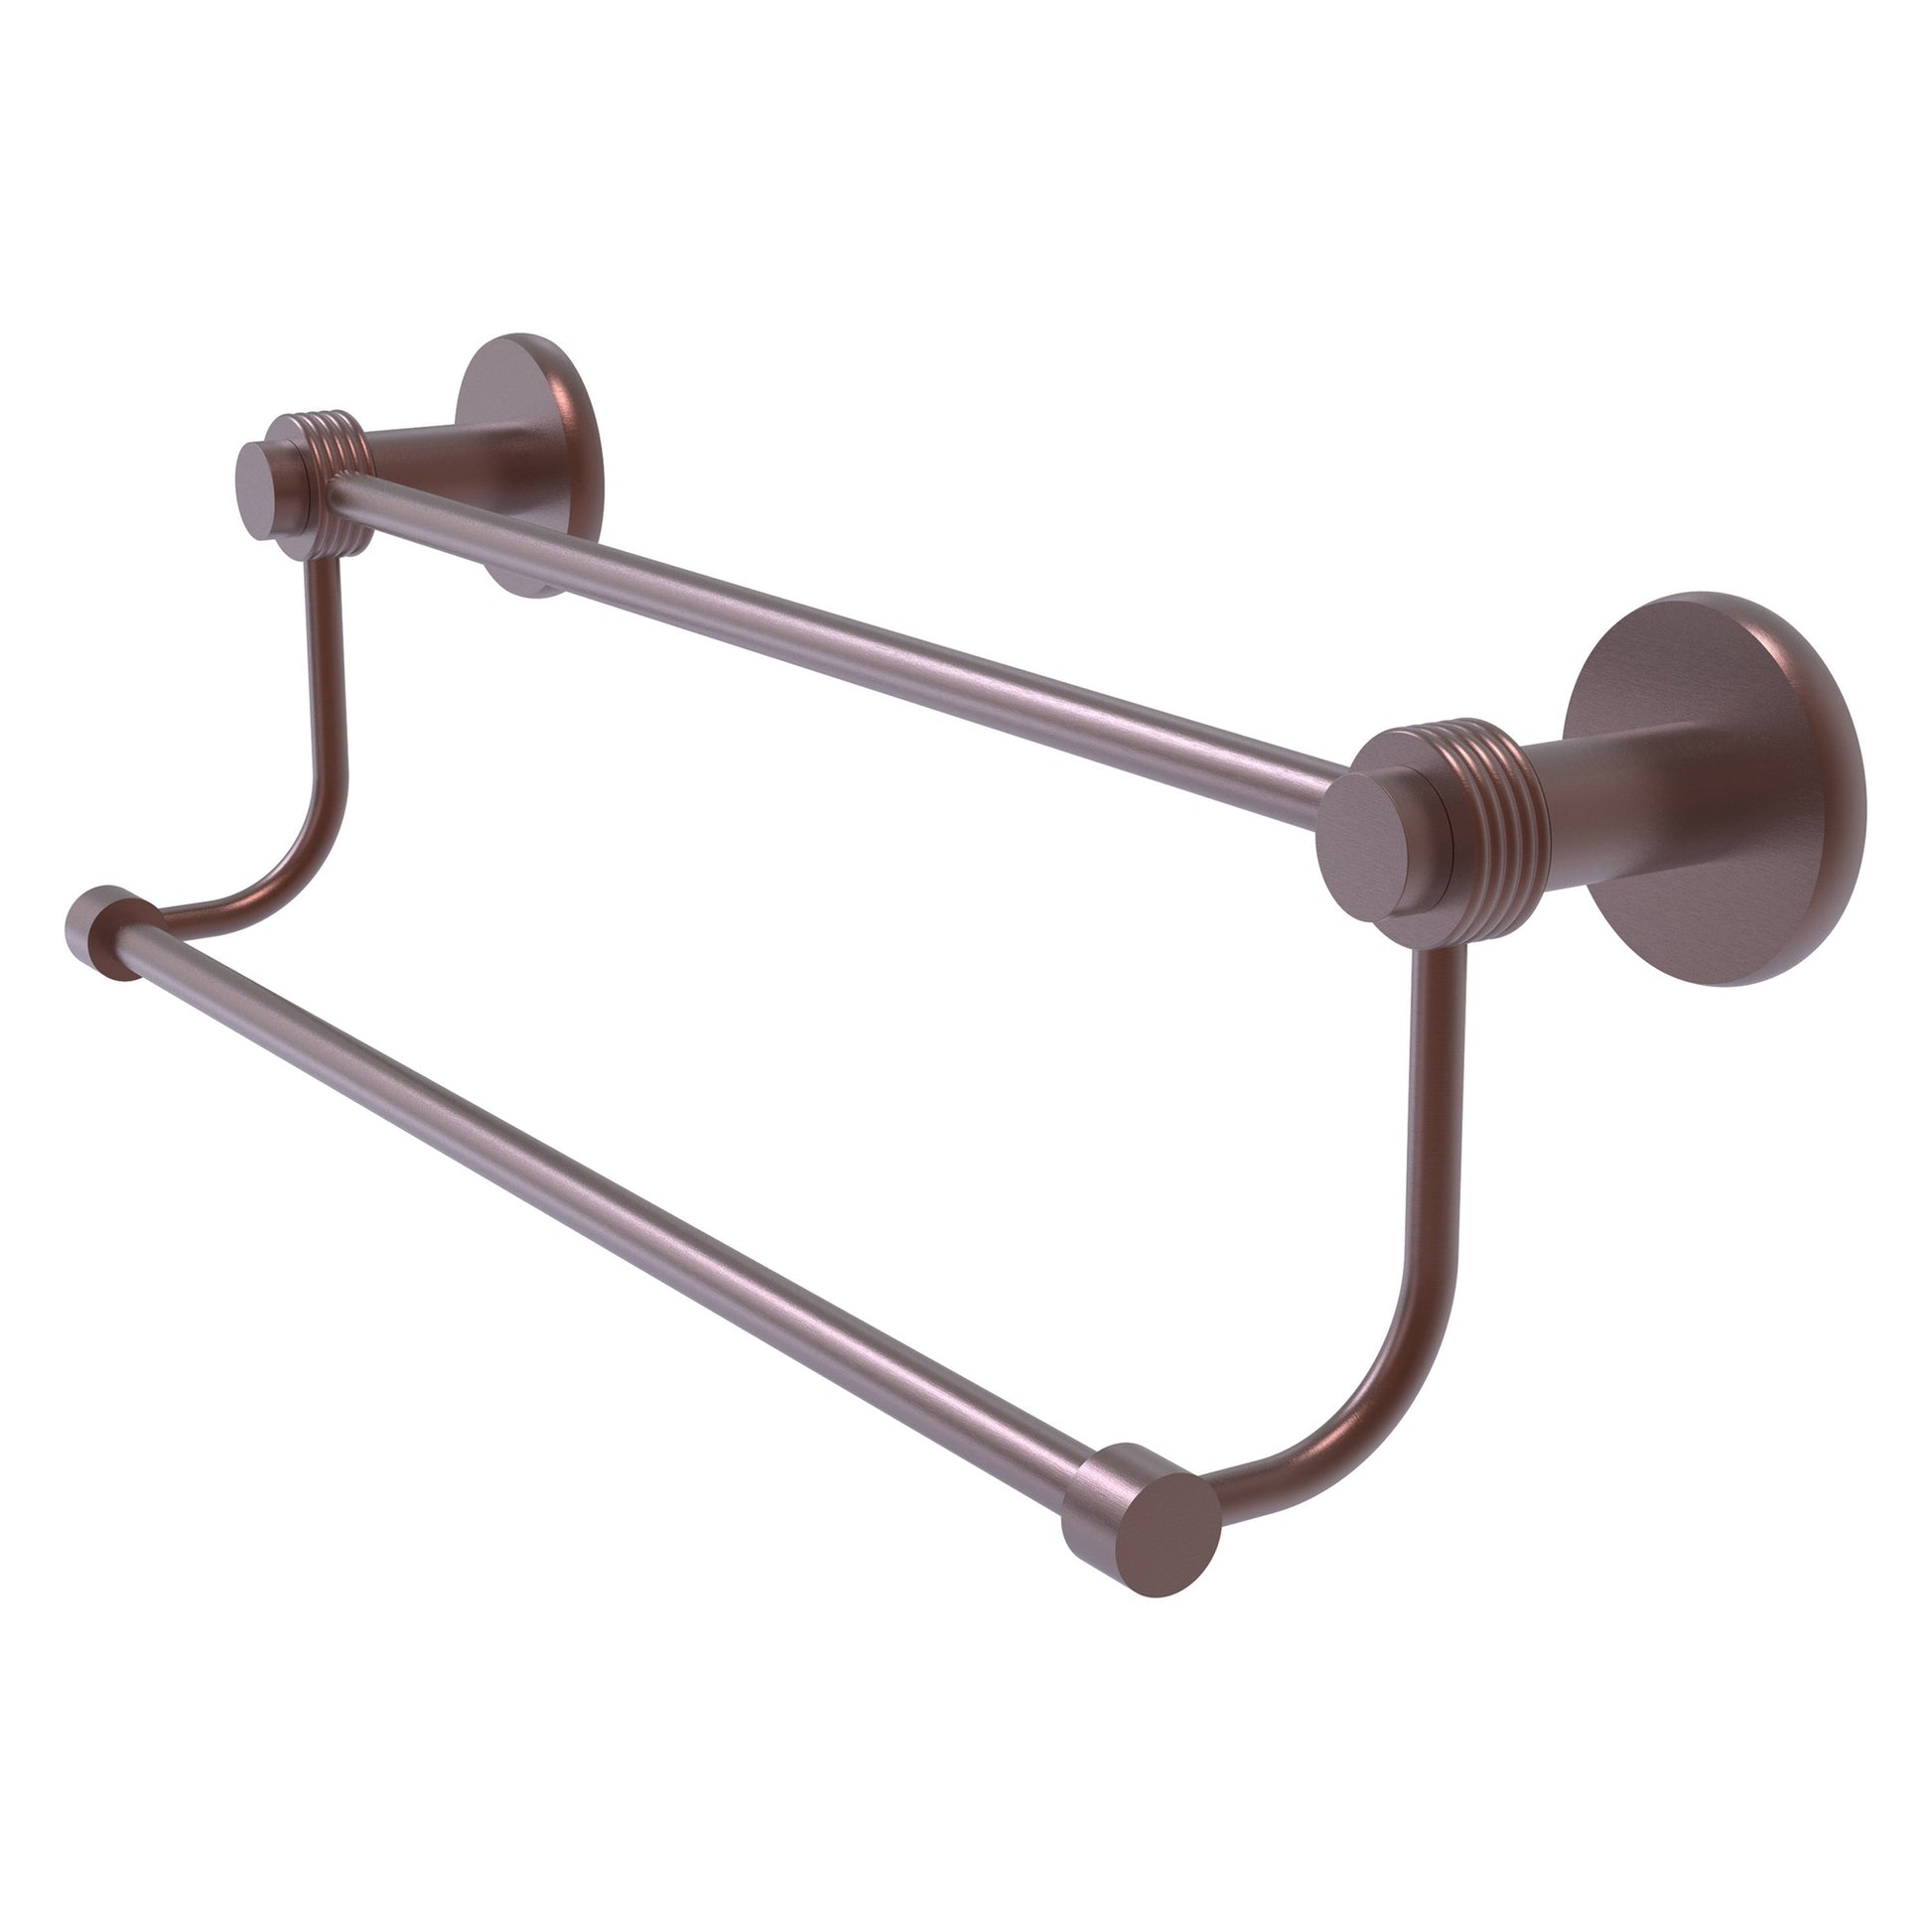 Allied Brass Mercury 18" x 20.5" Antique Copper Solid Brass Double Towel Bar With Grooved Accents